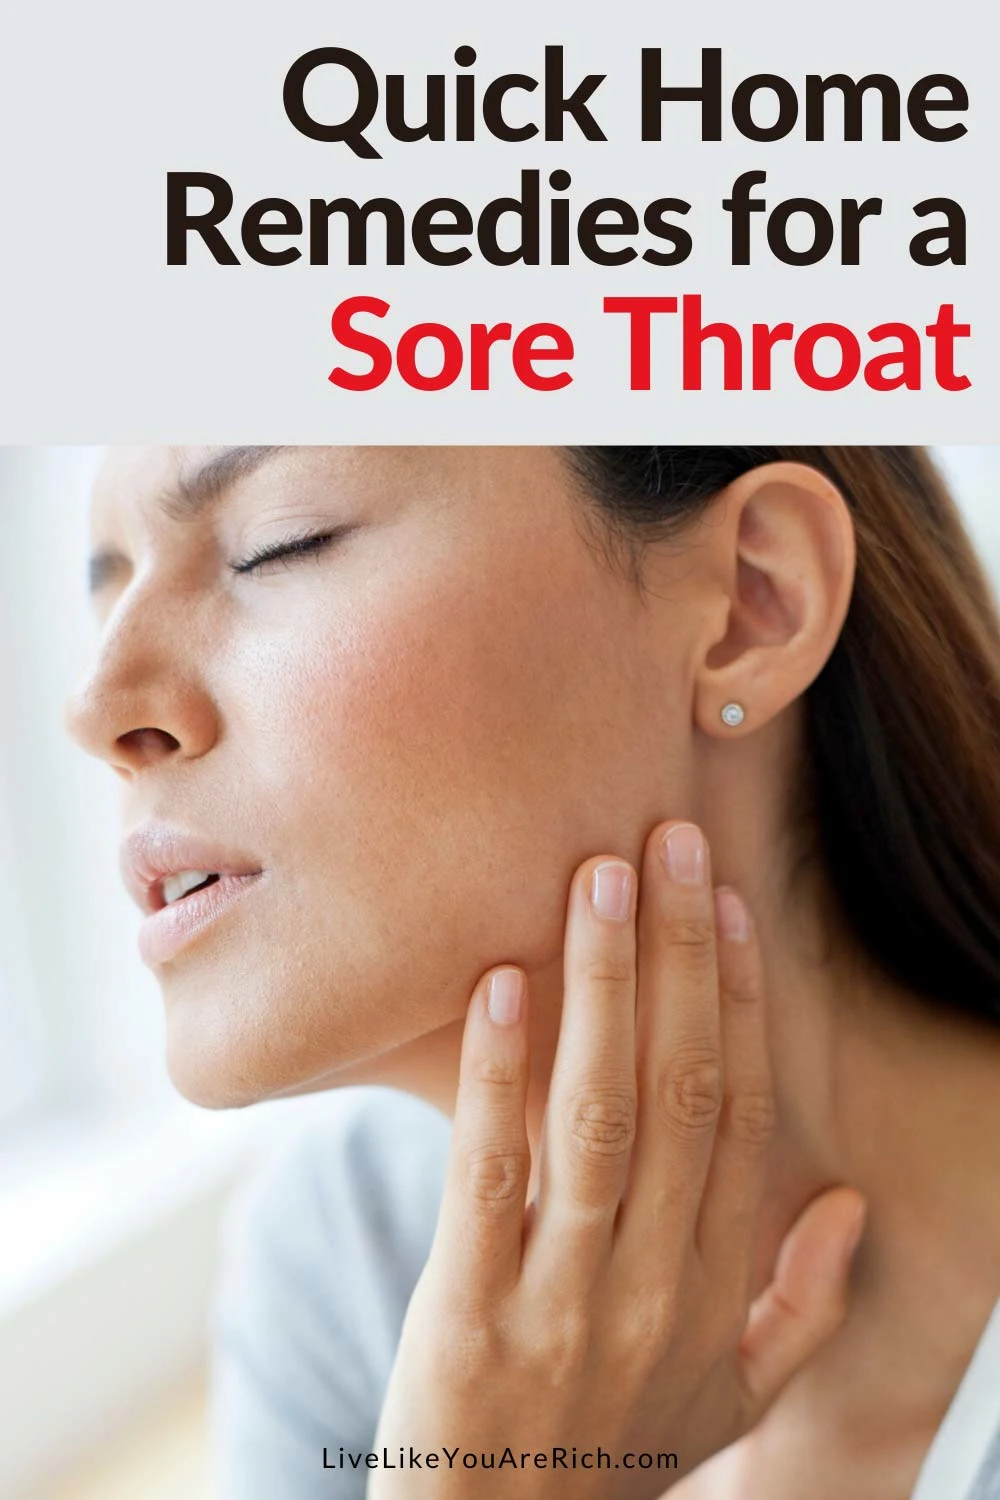 How to Quickly and Efficiently Soothe and Heal a Sore Throat great tips on what to try and 1 quick tip that really helps soothe and take away the pain! Gotta try. #sorethroat #remedies #naturalremedies